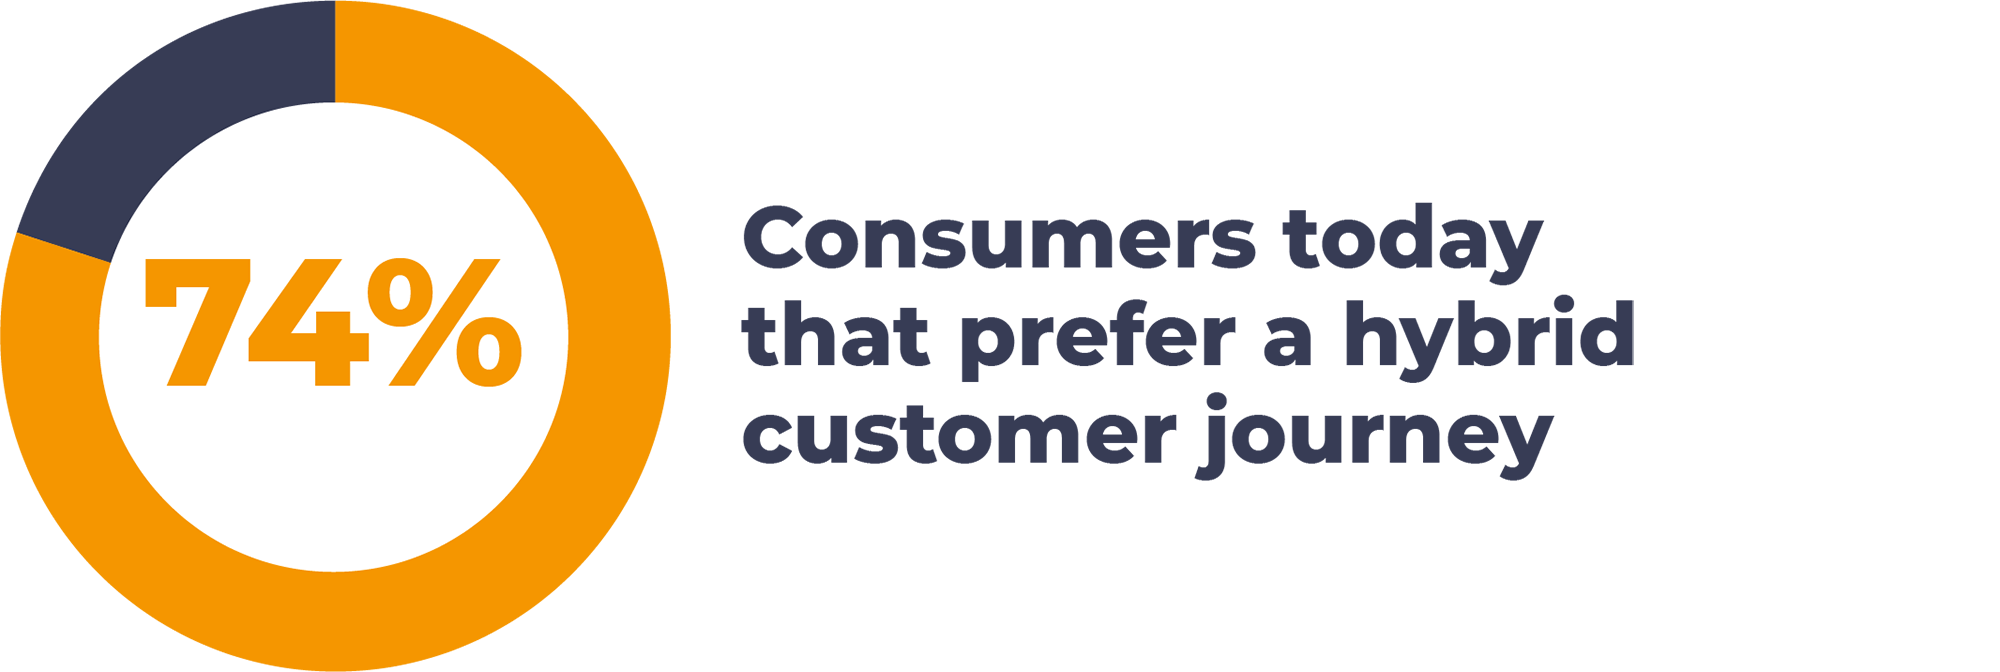 74% of consumers prefer a hybrid customer journey